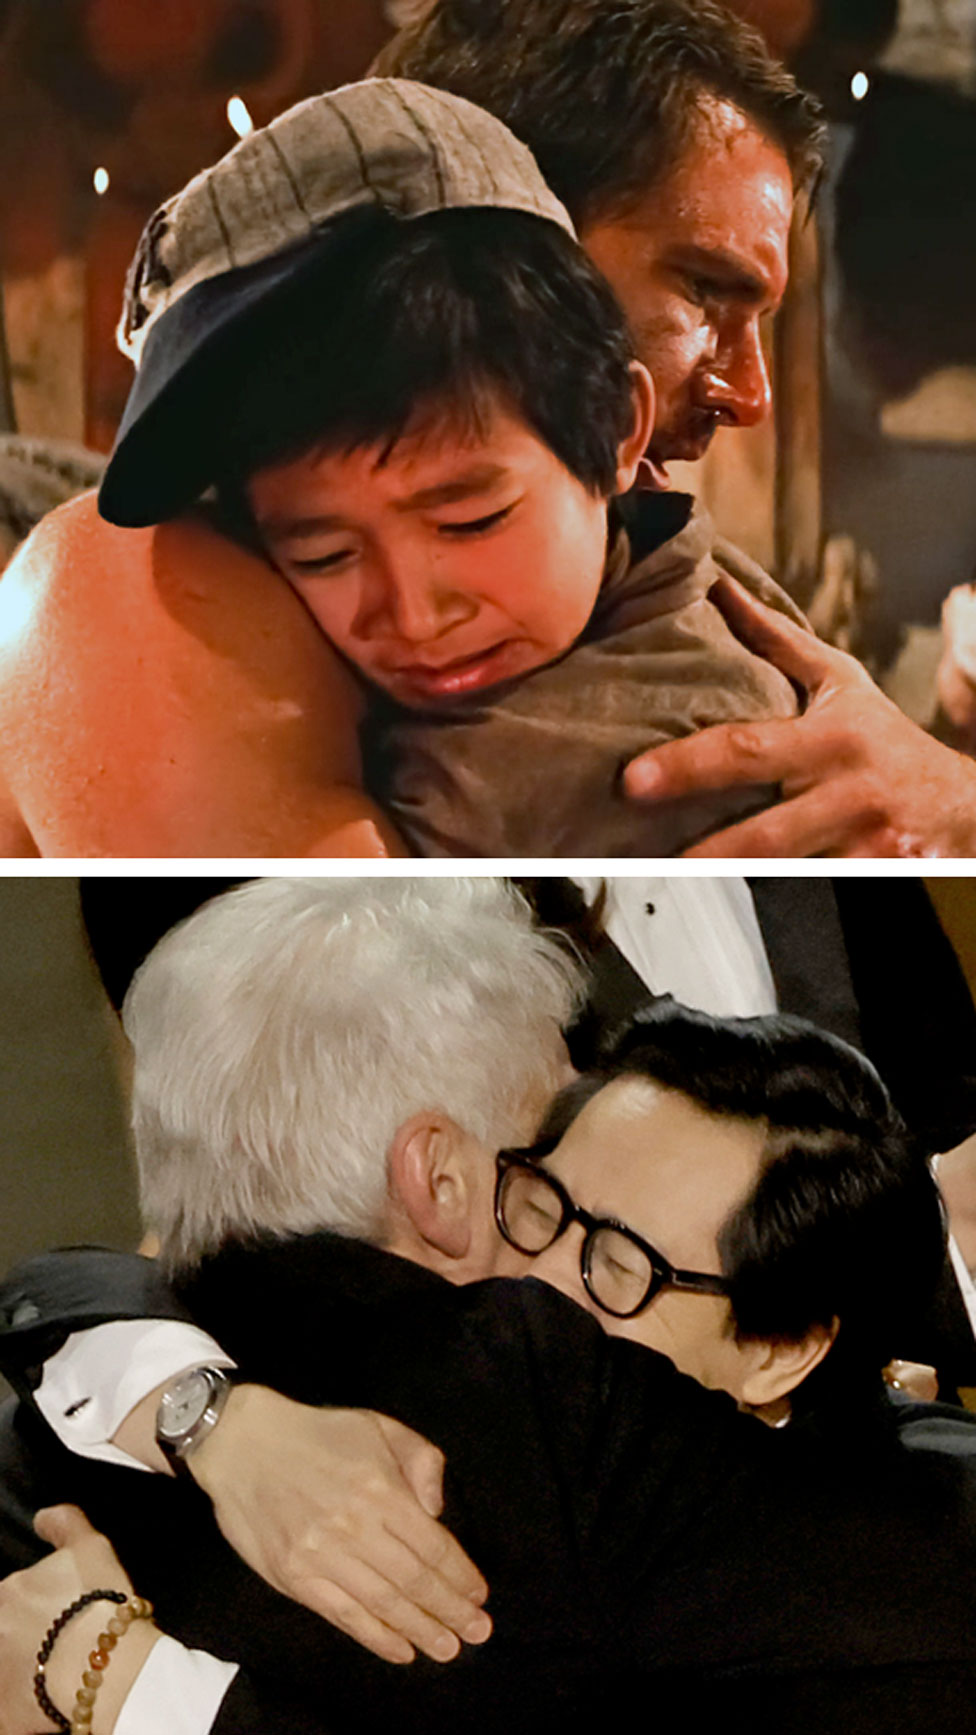 Harrison Ford and Ke Huy Quan in the Indiana Jones film and at Sunday night's Oscars